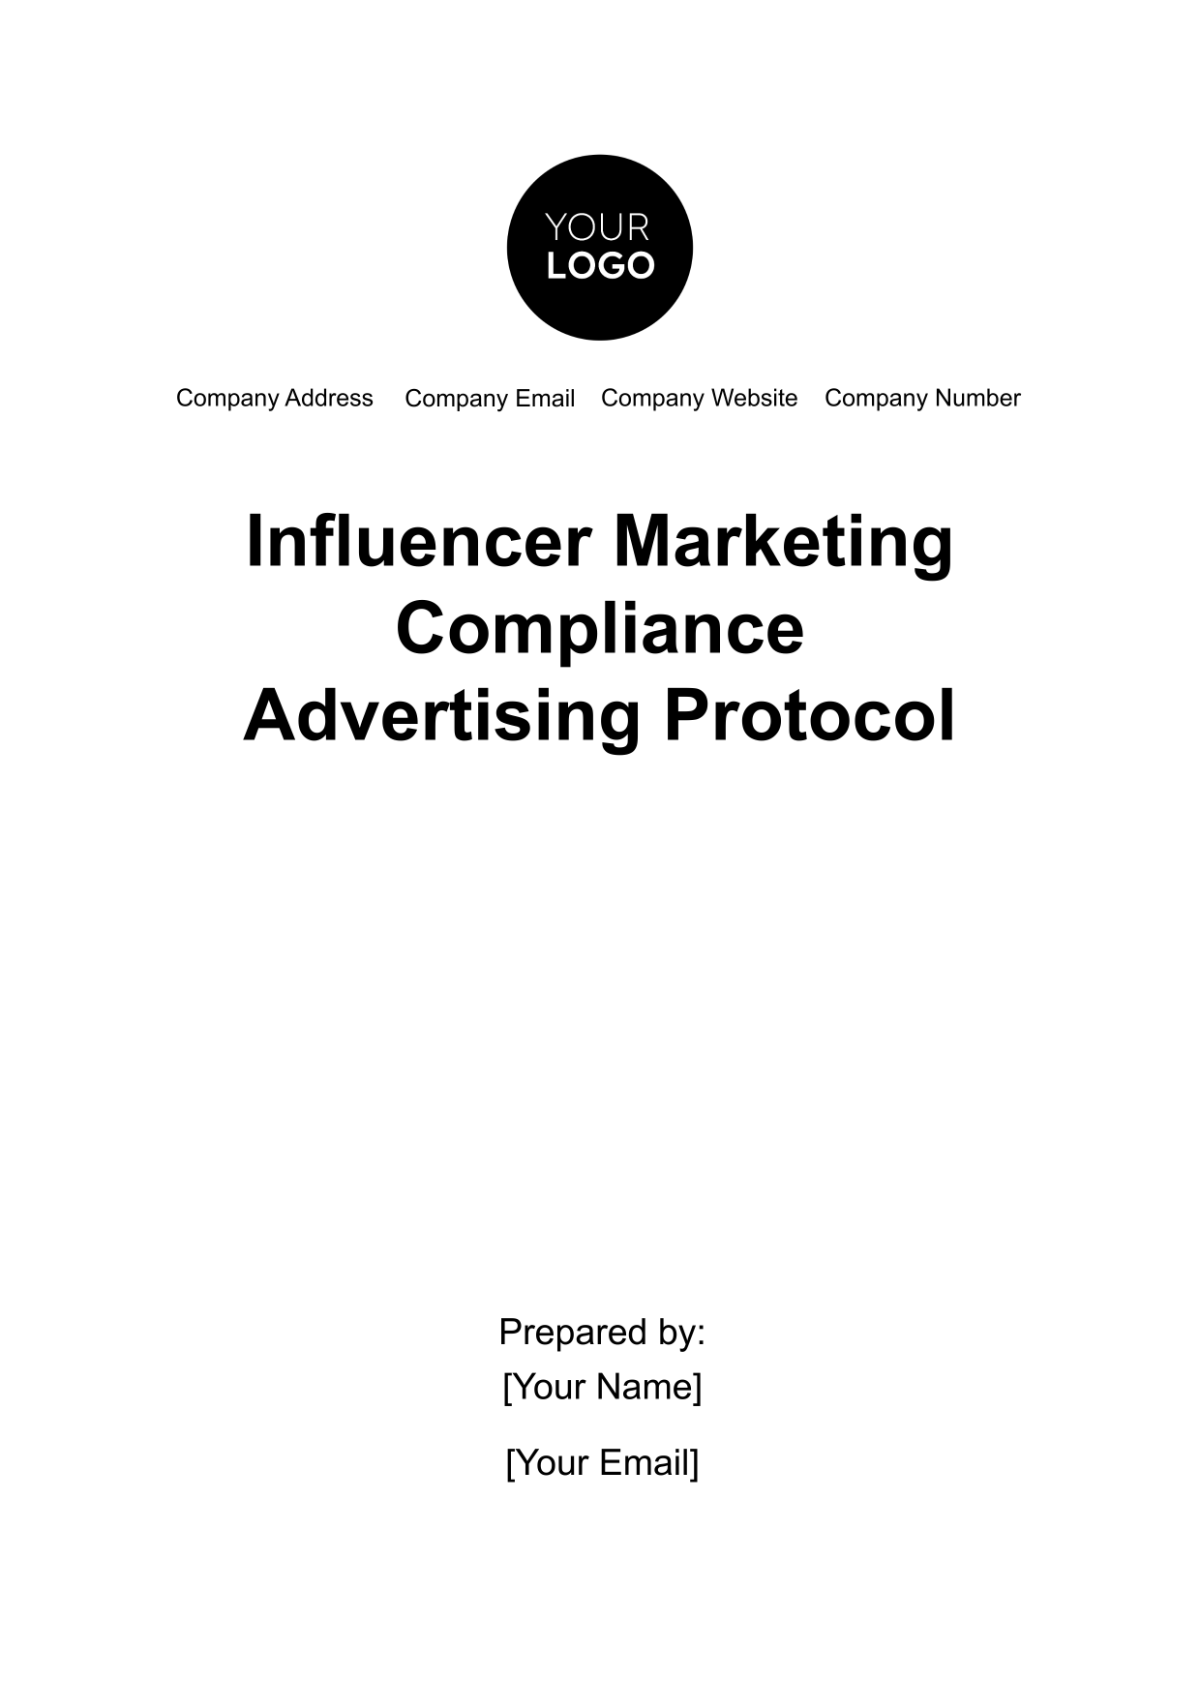 Free Influencer Marketing Compliance Advertising Protocol Template